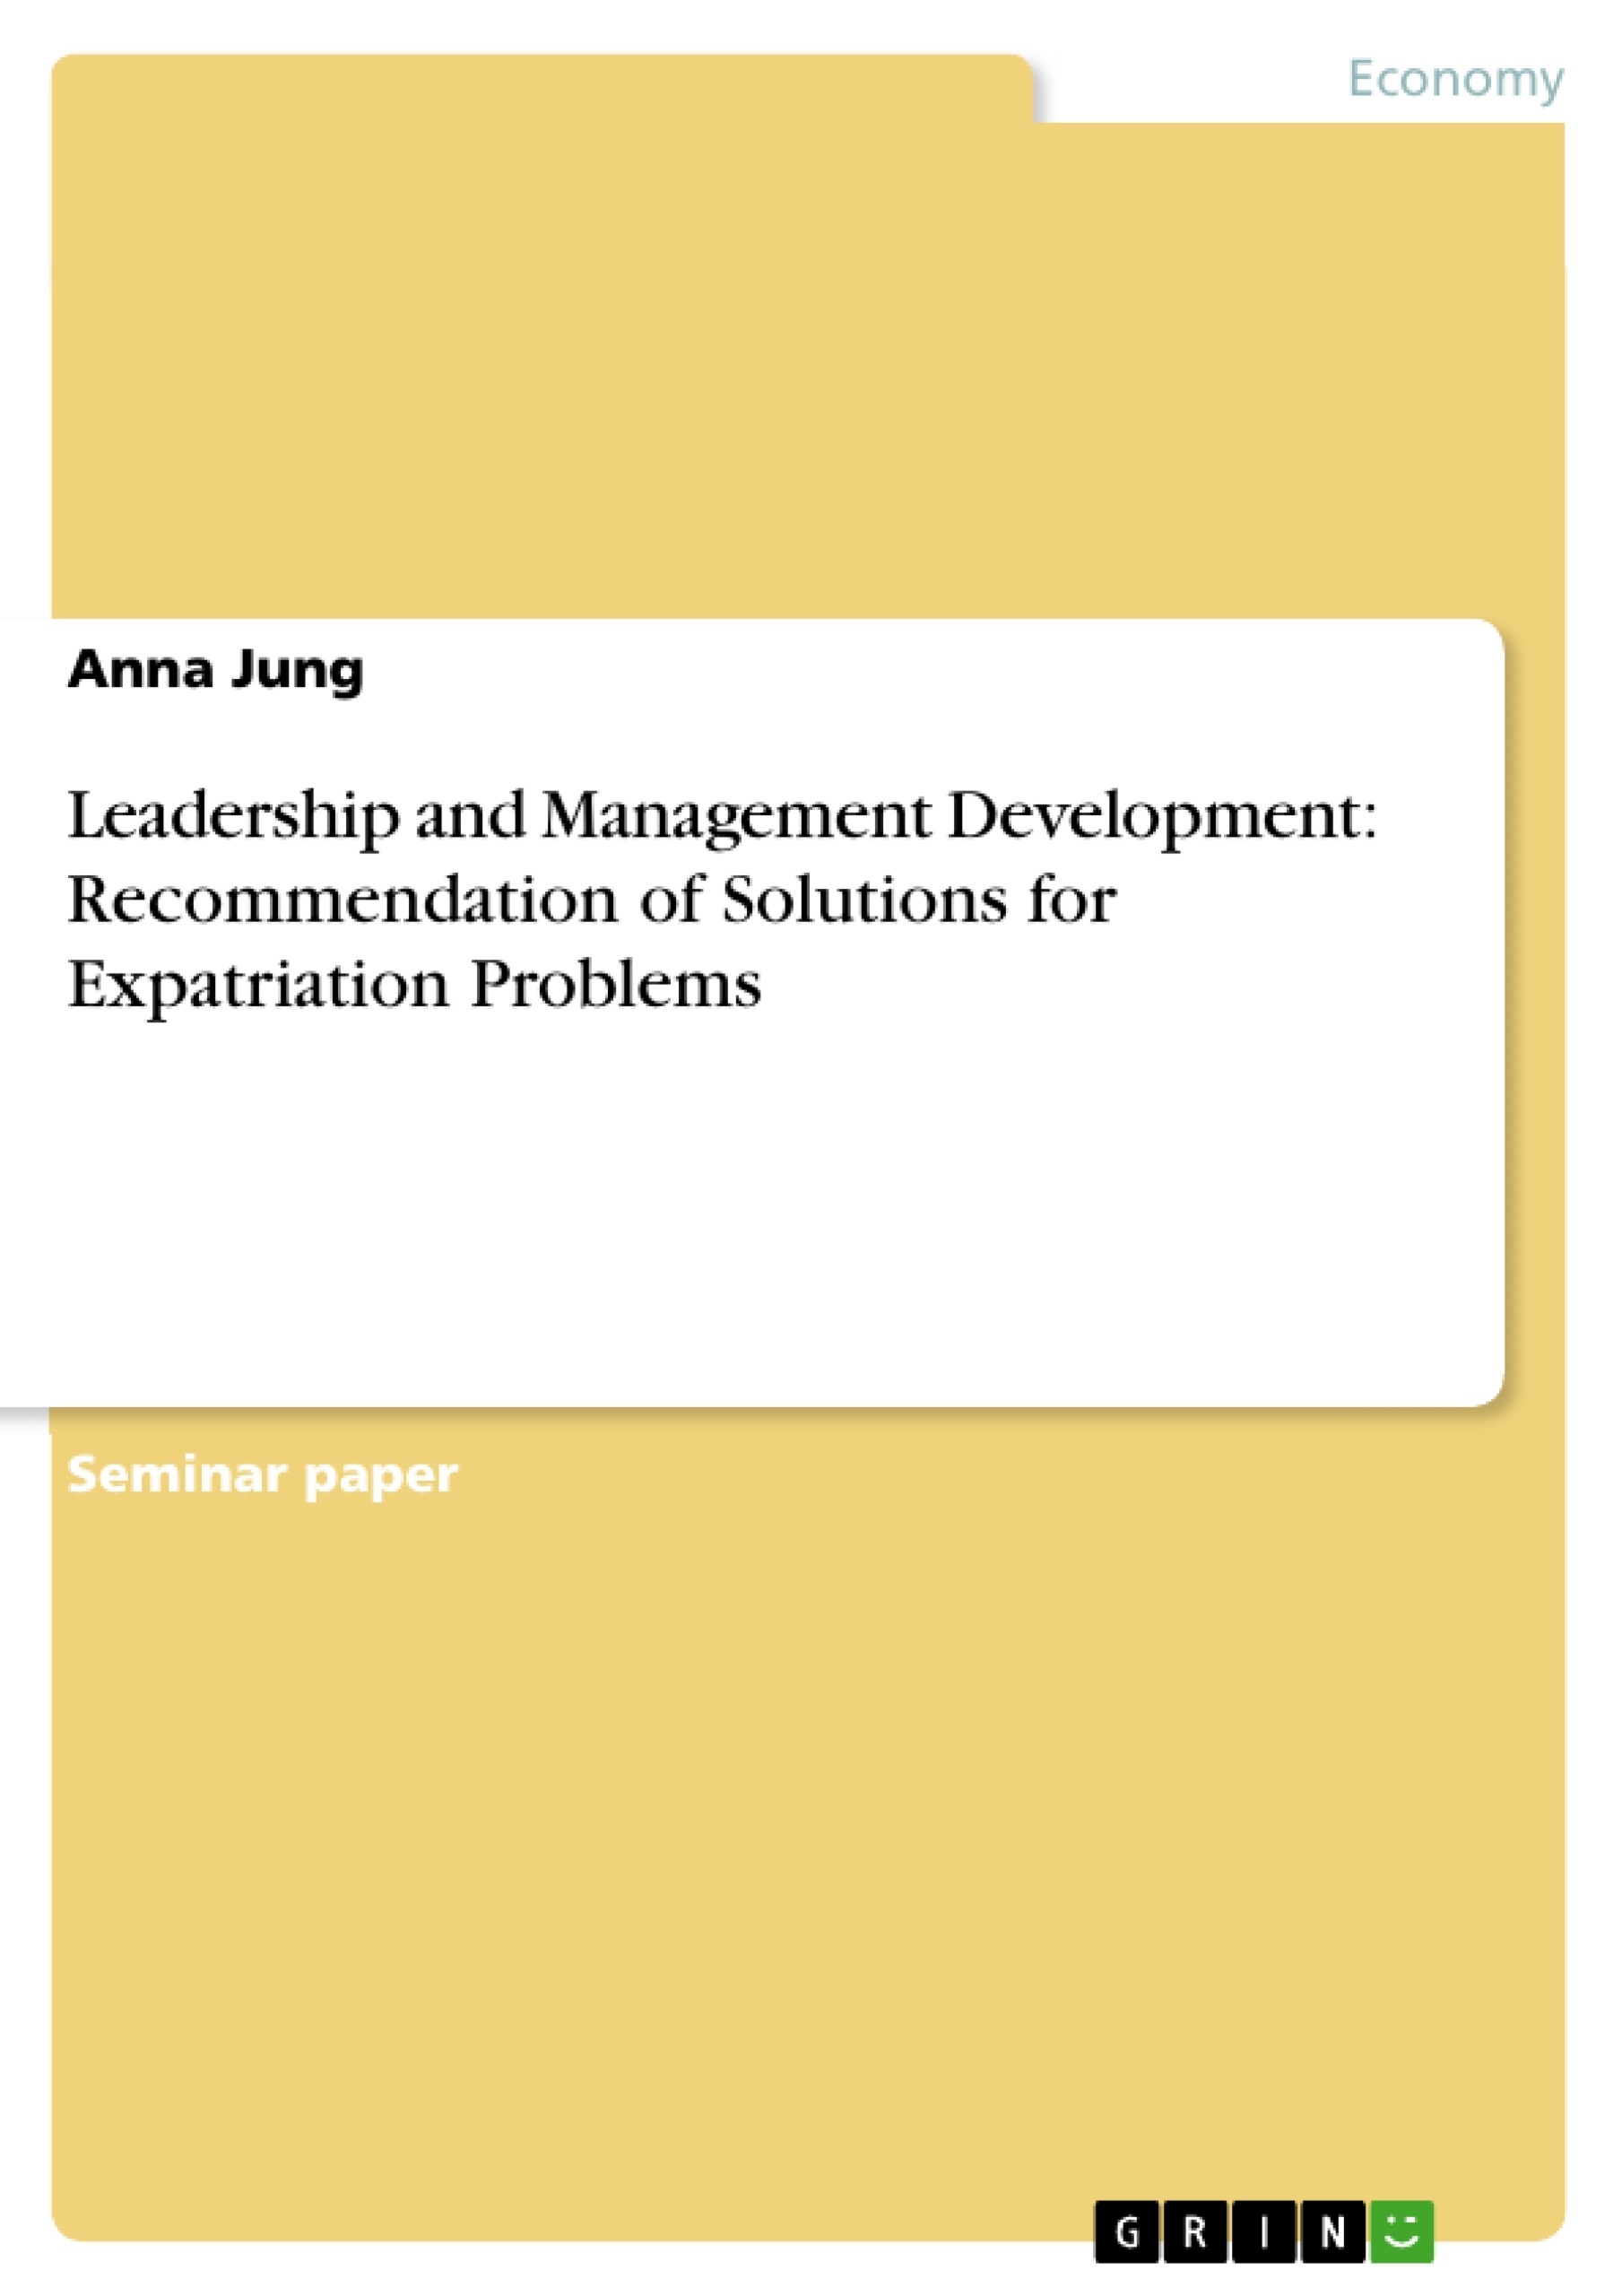 Title: Leadership and Management Development: Recommendation of Solutions for Expatriation Problems